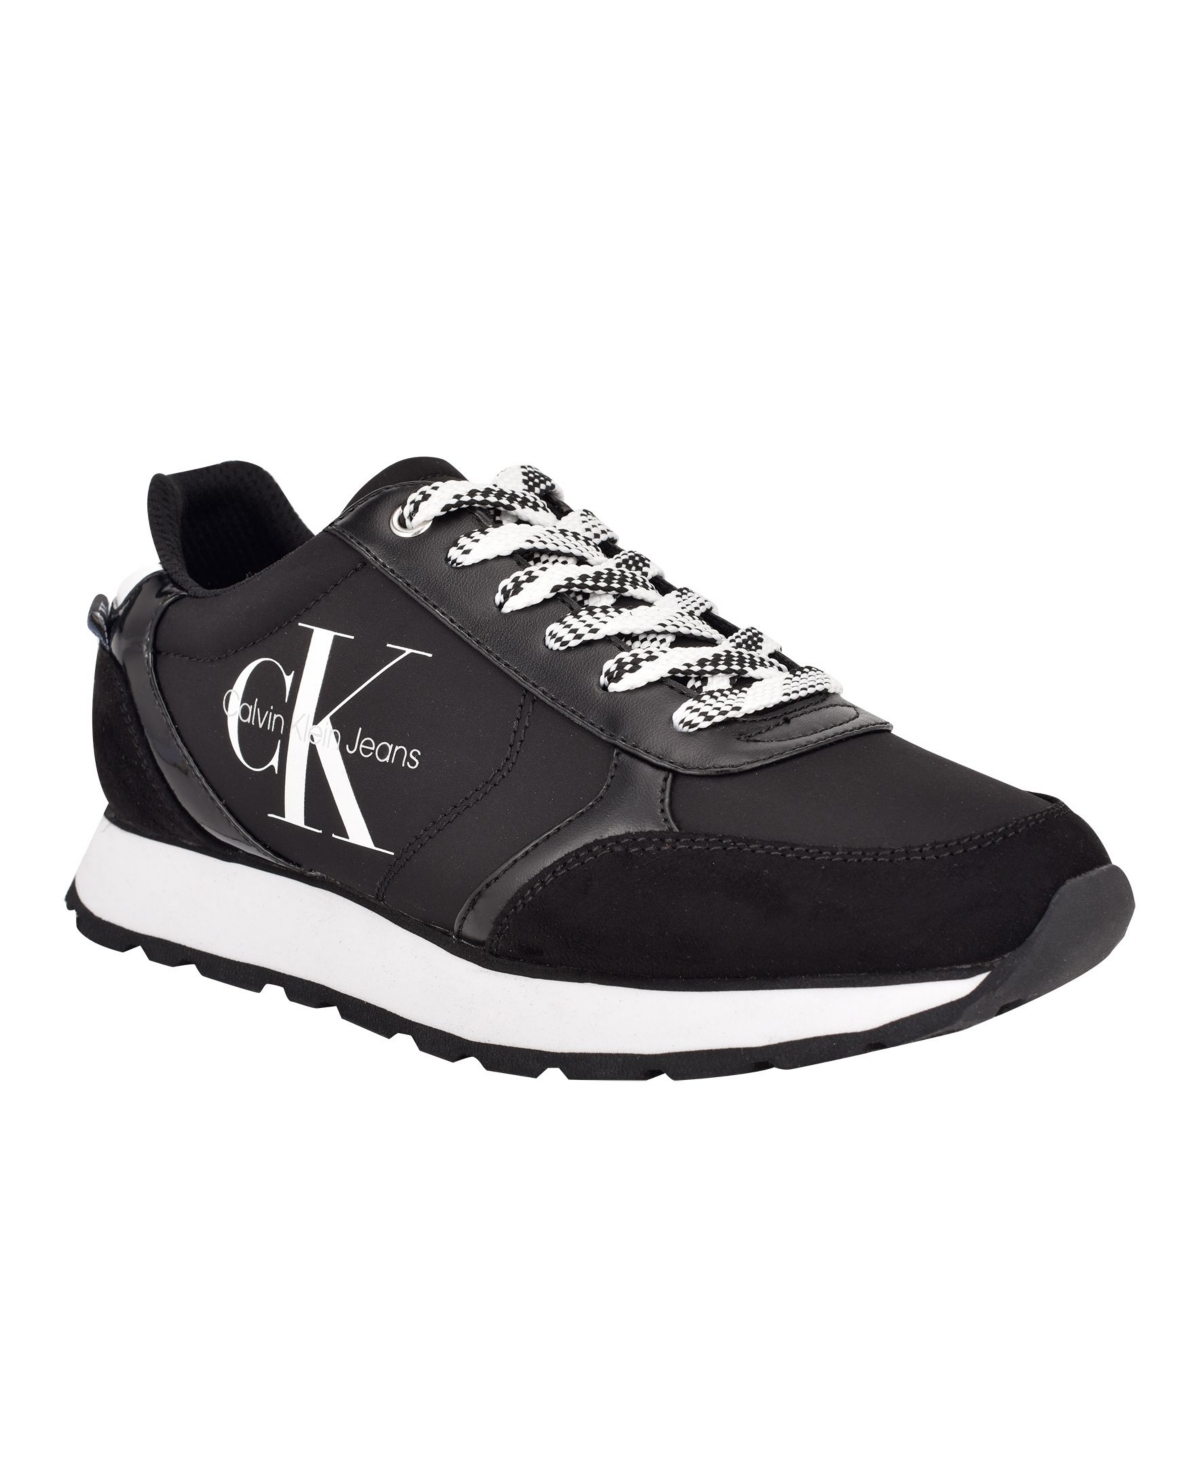 UPC 195182393160 product image for Calvin Klein Jeans Women's Cayle Logo Casual Lace-Up Sneakers Women's Shoes | upcitemdb.com